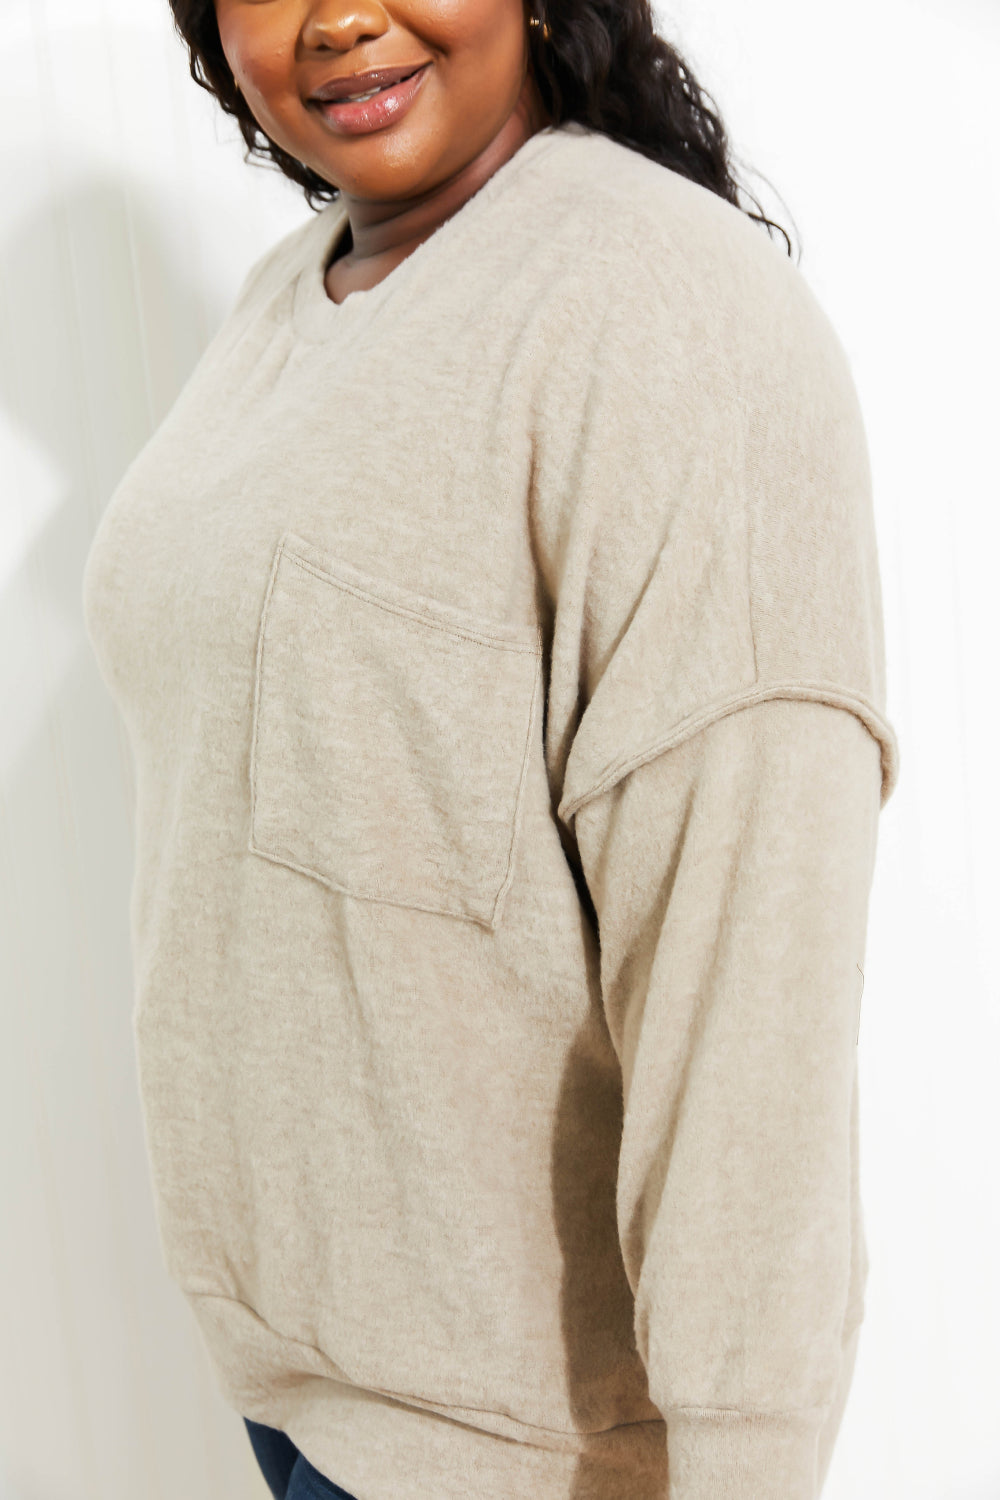 Zenana Home for the Weekend Full Size Brushed Melange Sweater